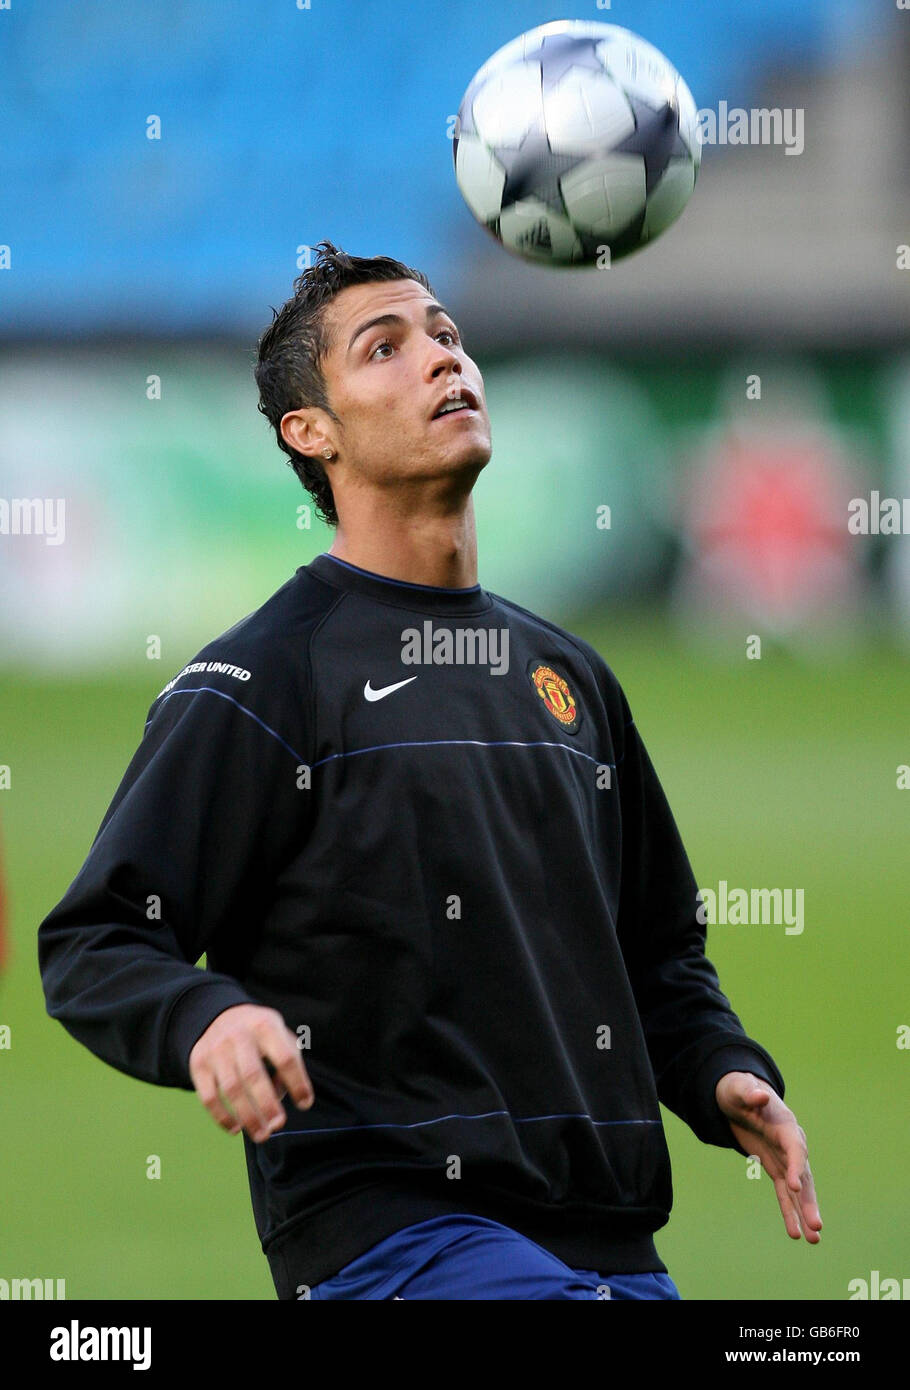 Manchester United's Cristiano Ronaldo during a training session at Energi  Nord Arena, Aalborg, Denmark Stock Photo - Alamy